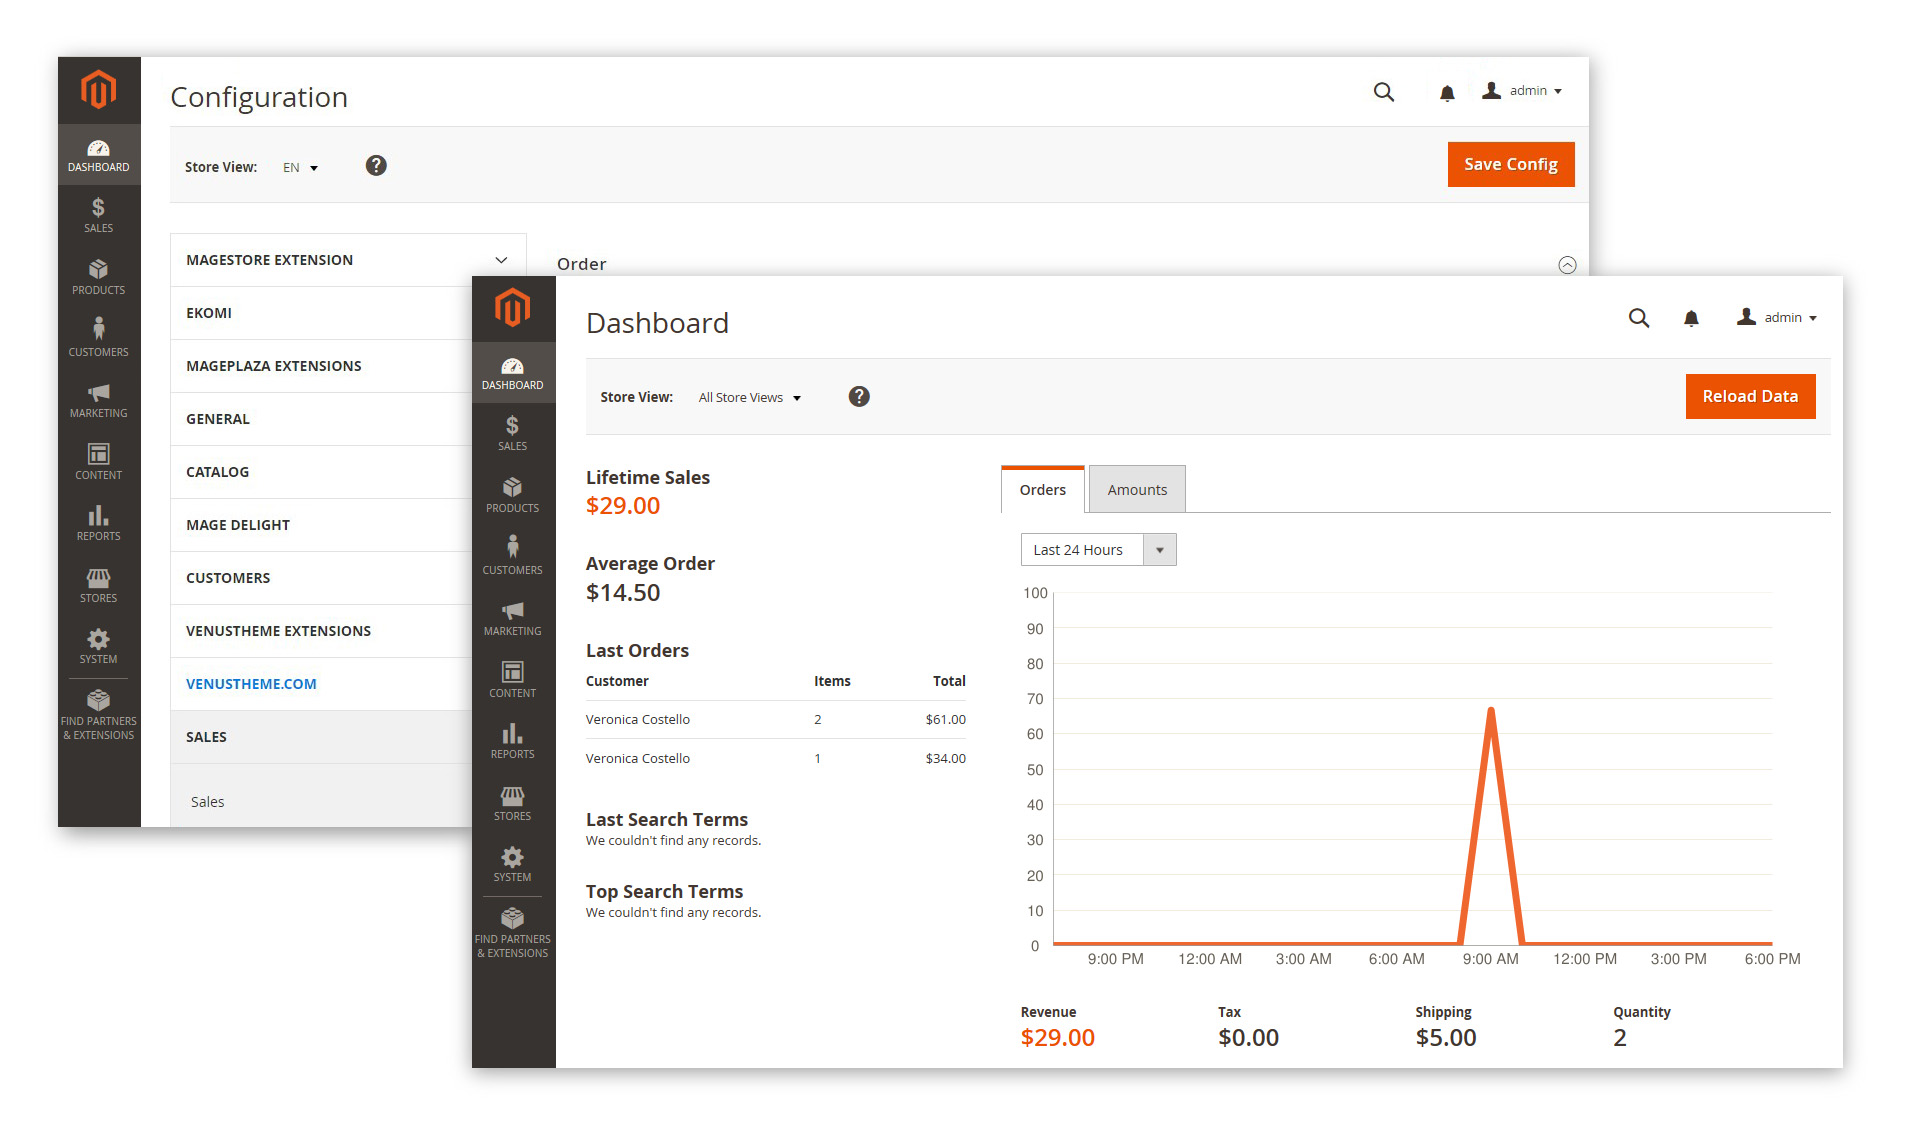 Screenshots of the Magento software solution. featured Image